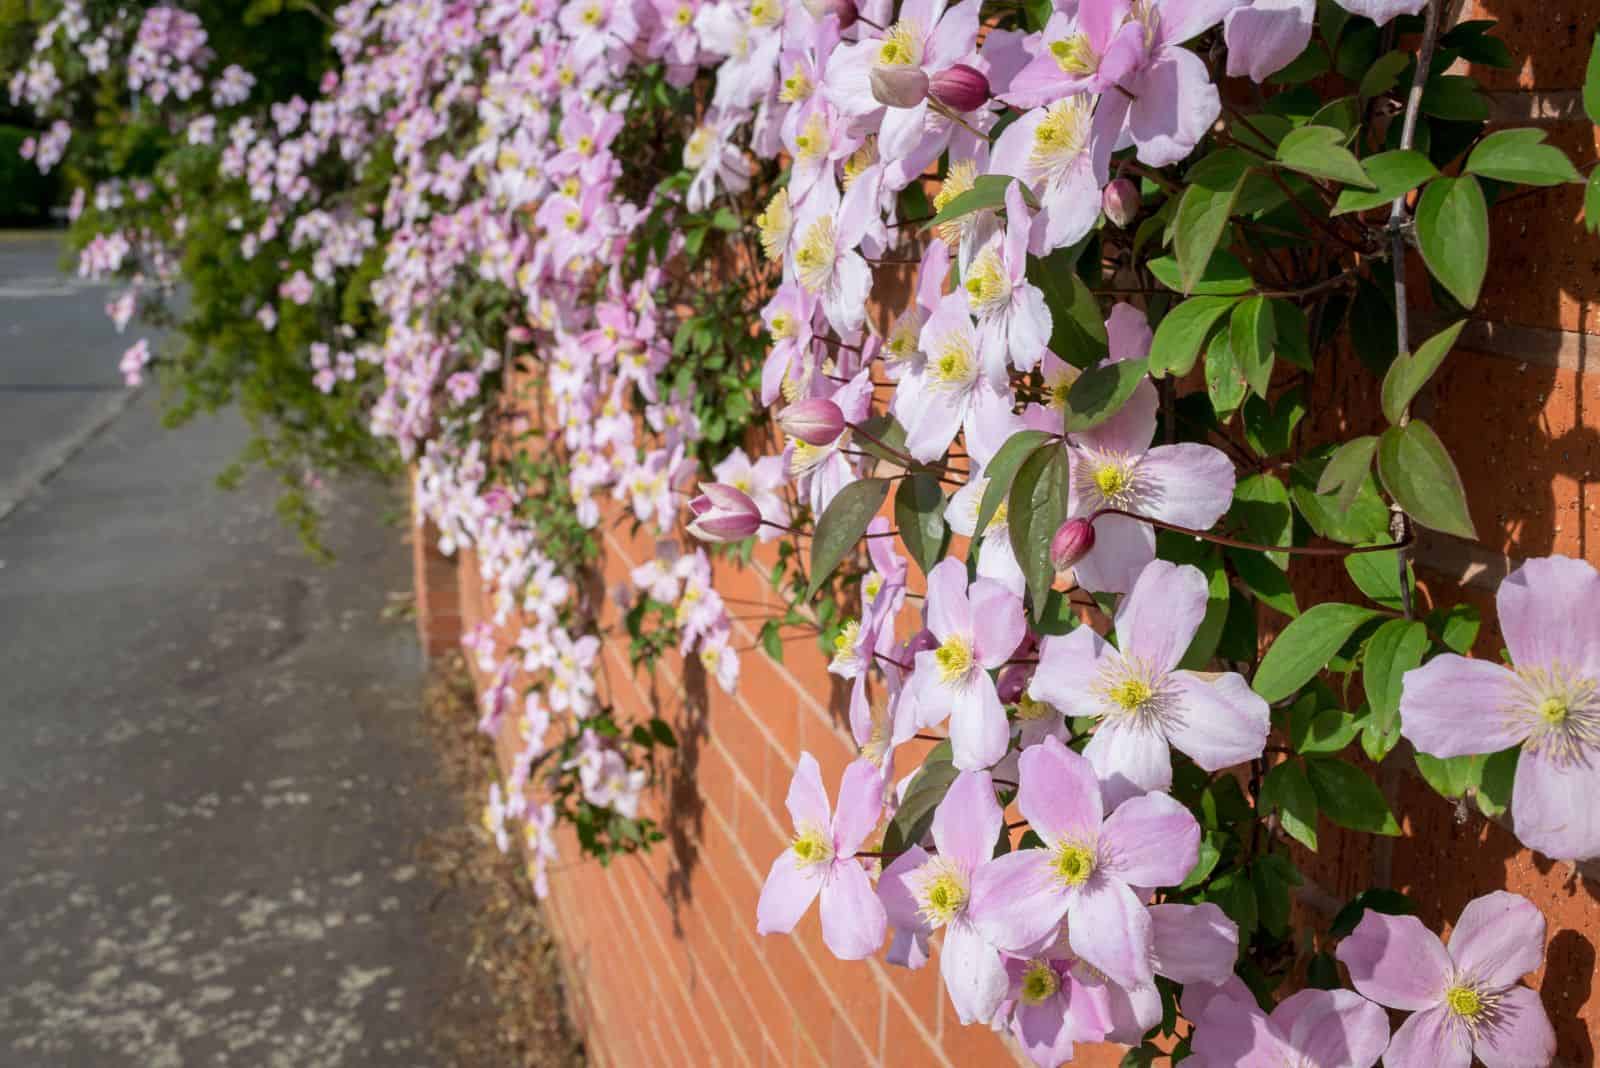 clematis grows over the wall